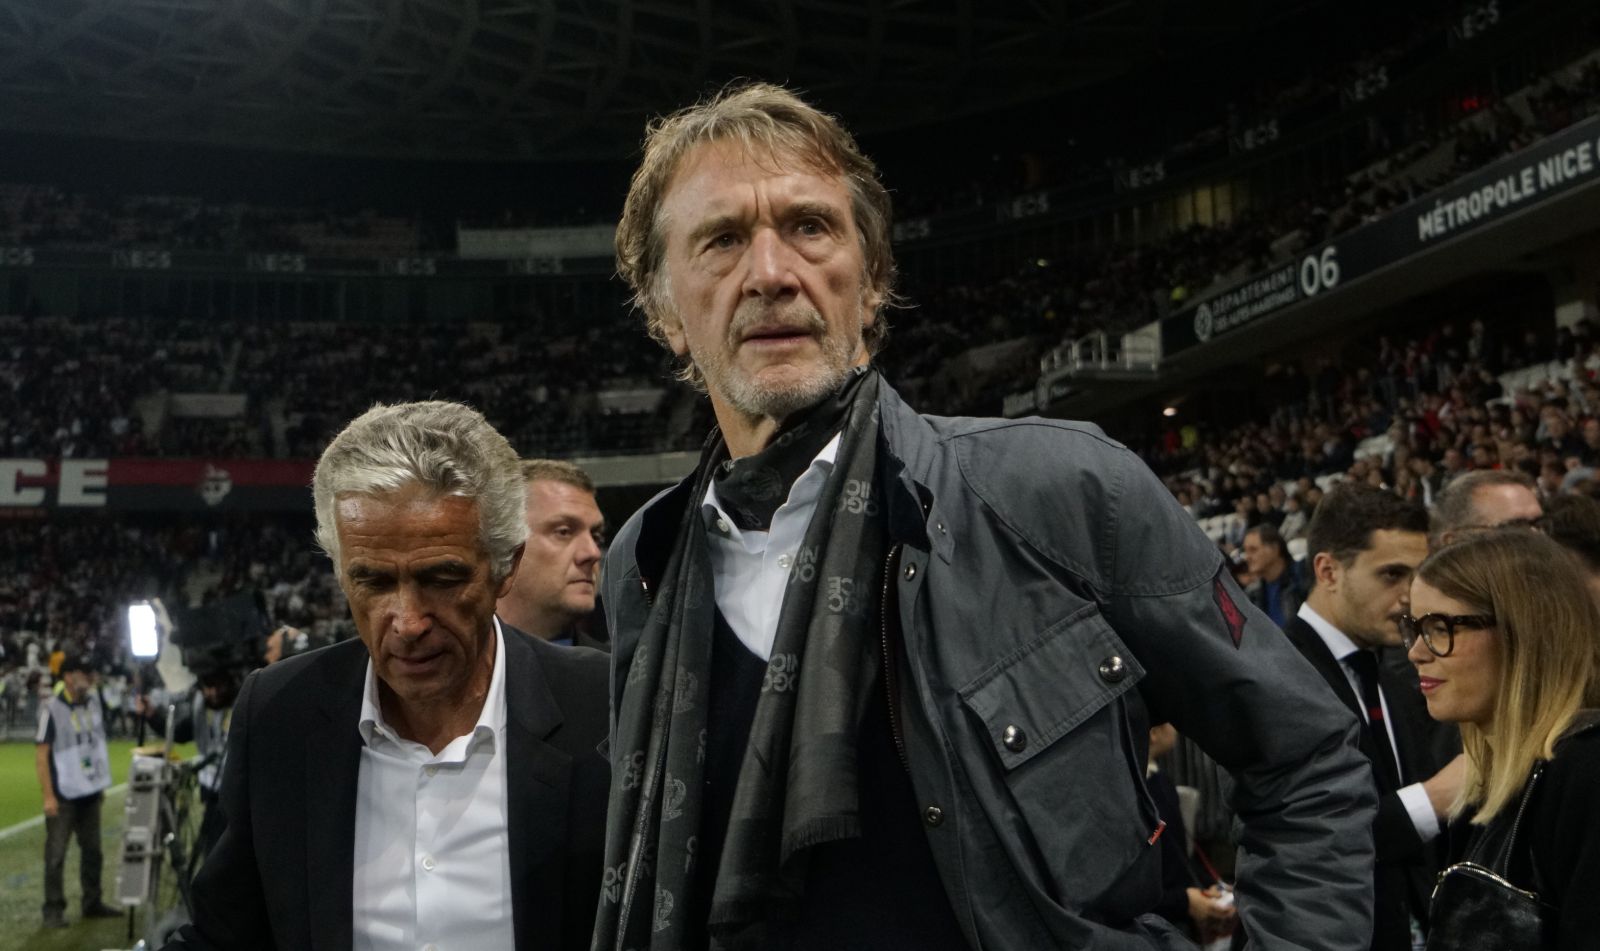 FILE - Sir Jim Ratcliffe looks on ahead of the French League One soccer match between Nice and Paris Saint Germain in Allianz Riviera stadium in Nice, southern France, on Oct.18, 2019. More than a year after it was put up for sale, Manchester United said Sunday that British billionaire Jim Ratcliffe had agreed to buy a minority stake in the storied Premier League club. Ratcliffe, who owns petrochemicals giant INEOS and is one of Britain’s richest people, has bought a stake of “up to 25%” of the 20-time league champions and will invest $300 million in its Old Trafford stadium. (AP Photo/Daniel Cole, File)